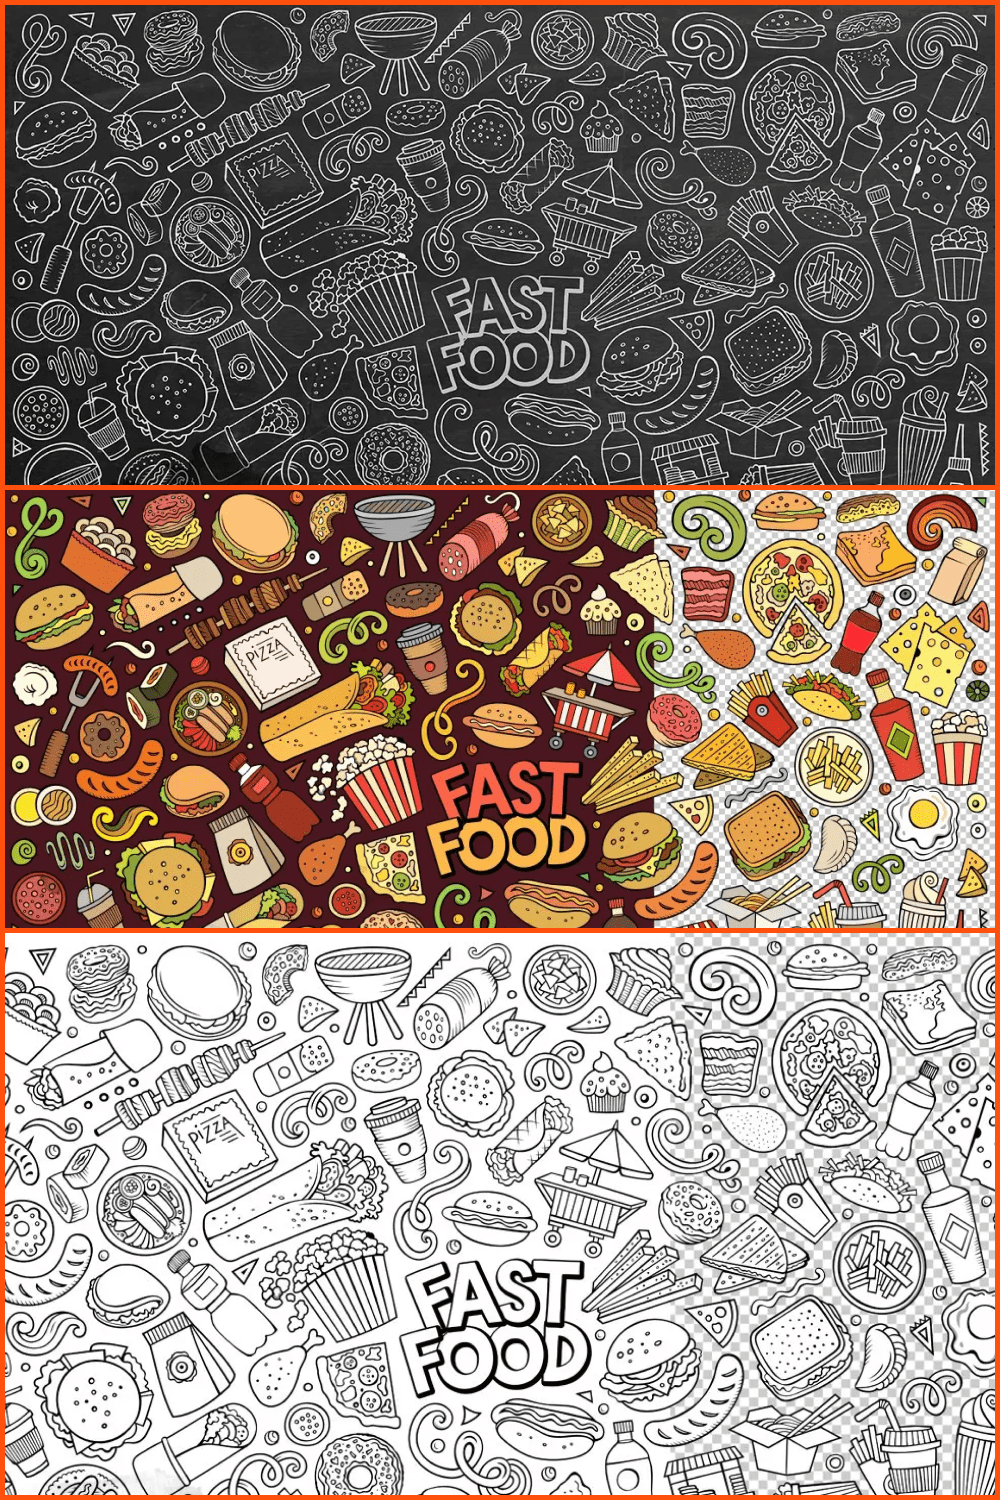 Hand drawn cartoon doodles of fast food items.